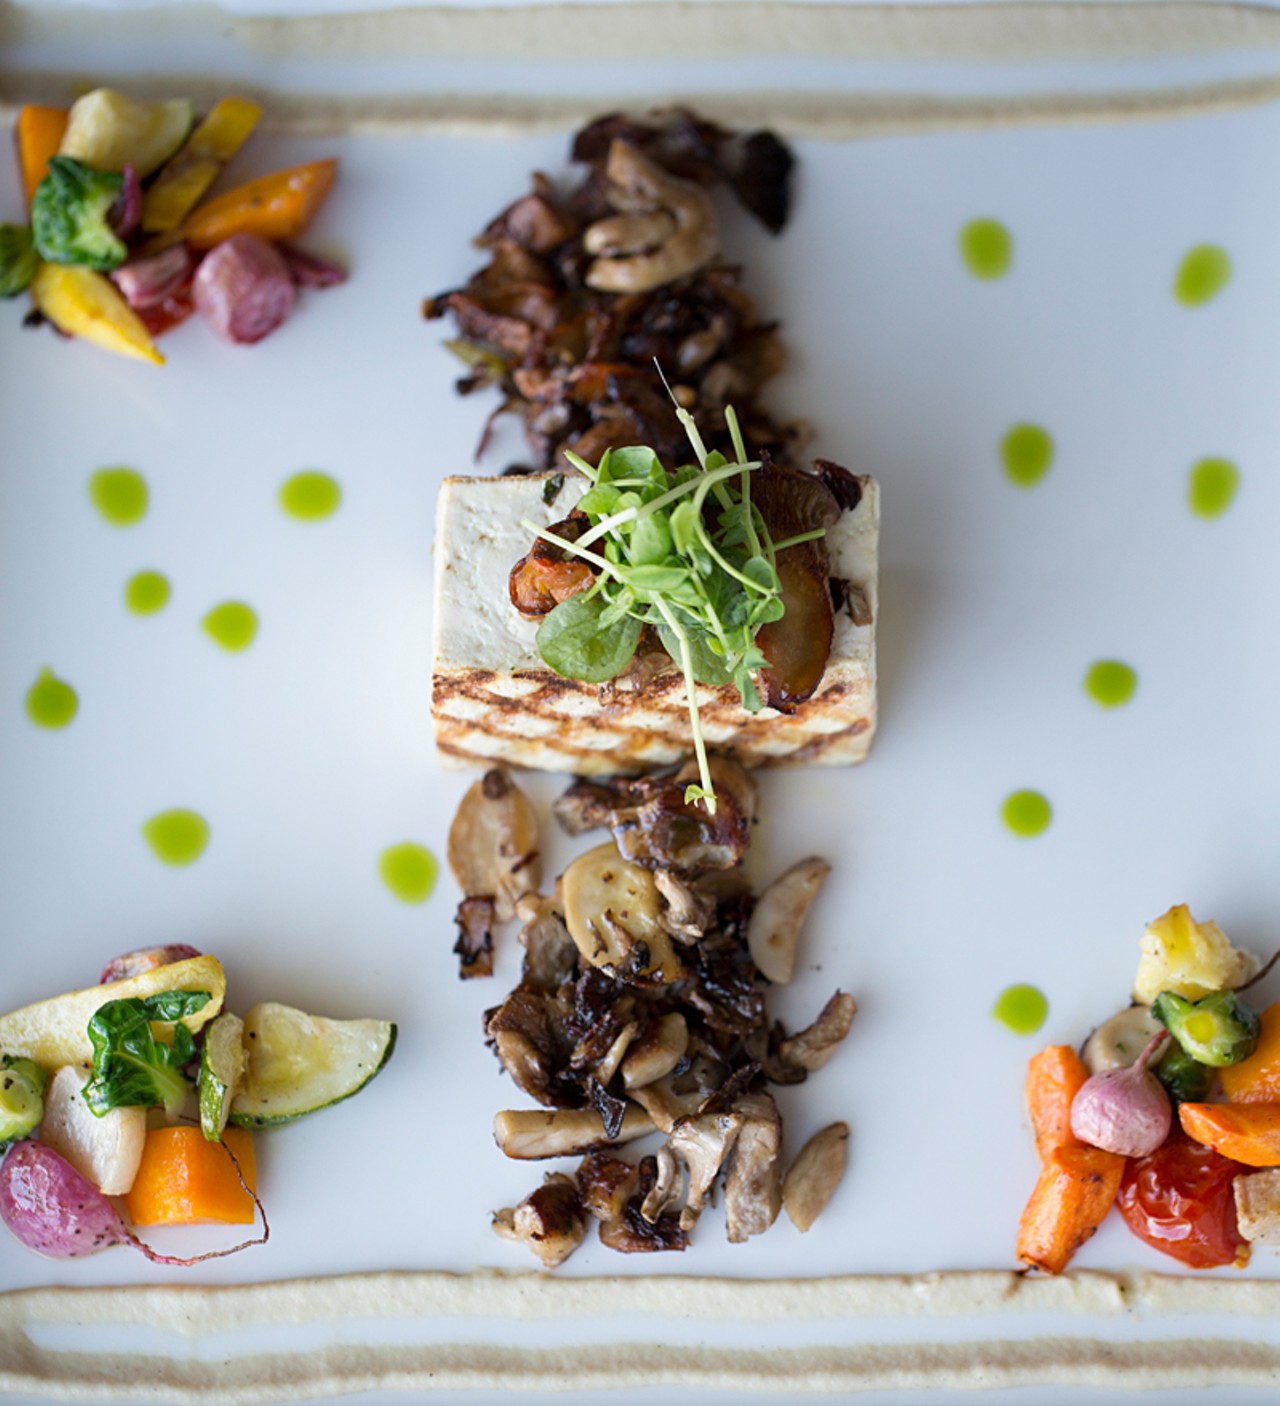 The "Marinated, Pressed and Grilled Tofu" is constructed from roasted Ozark mushrooms, petit root vegetables and two celery coulis.